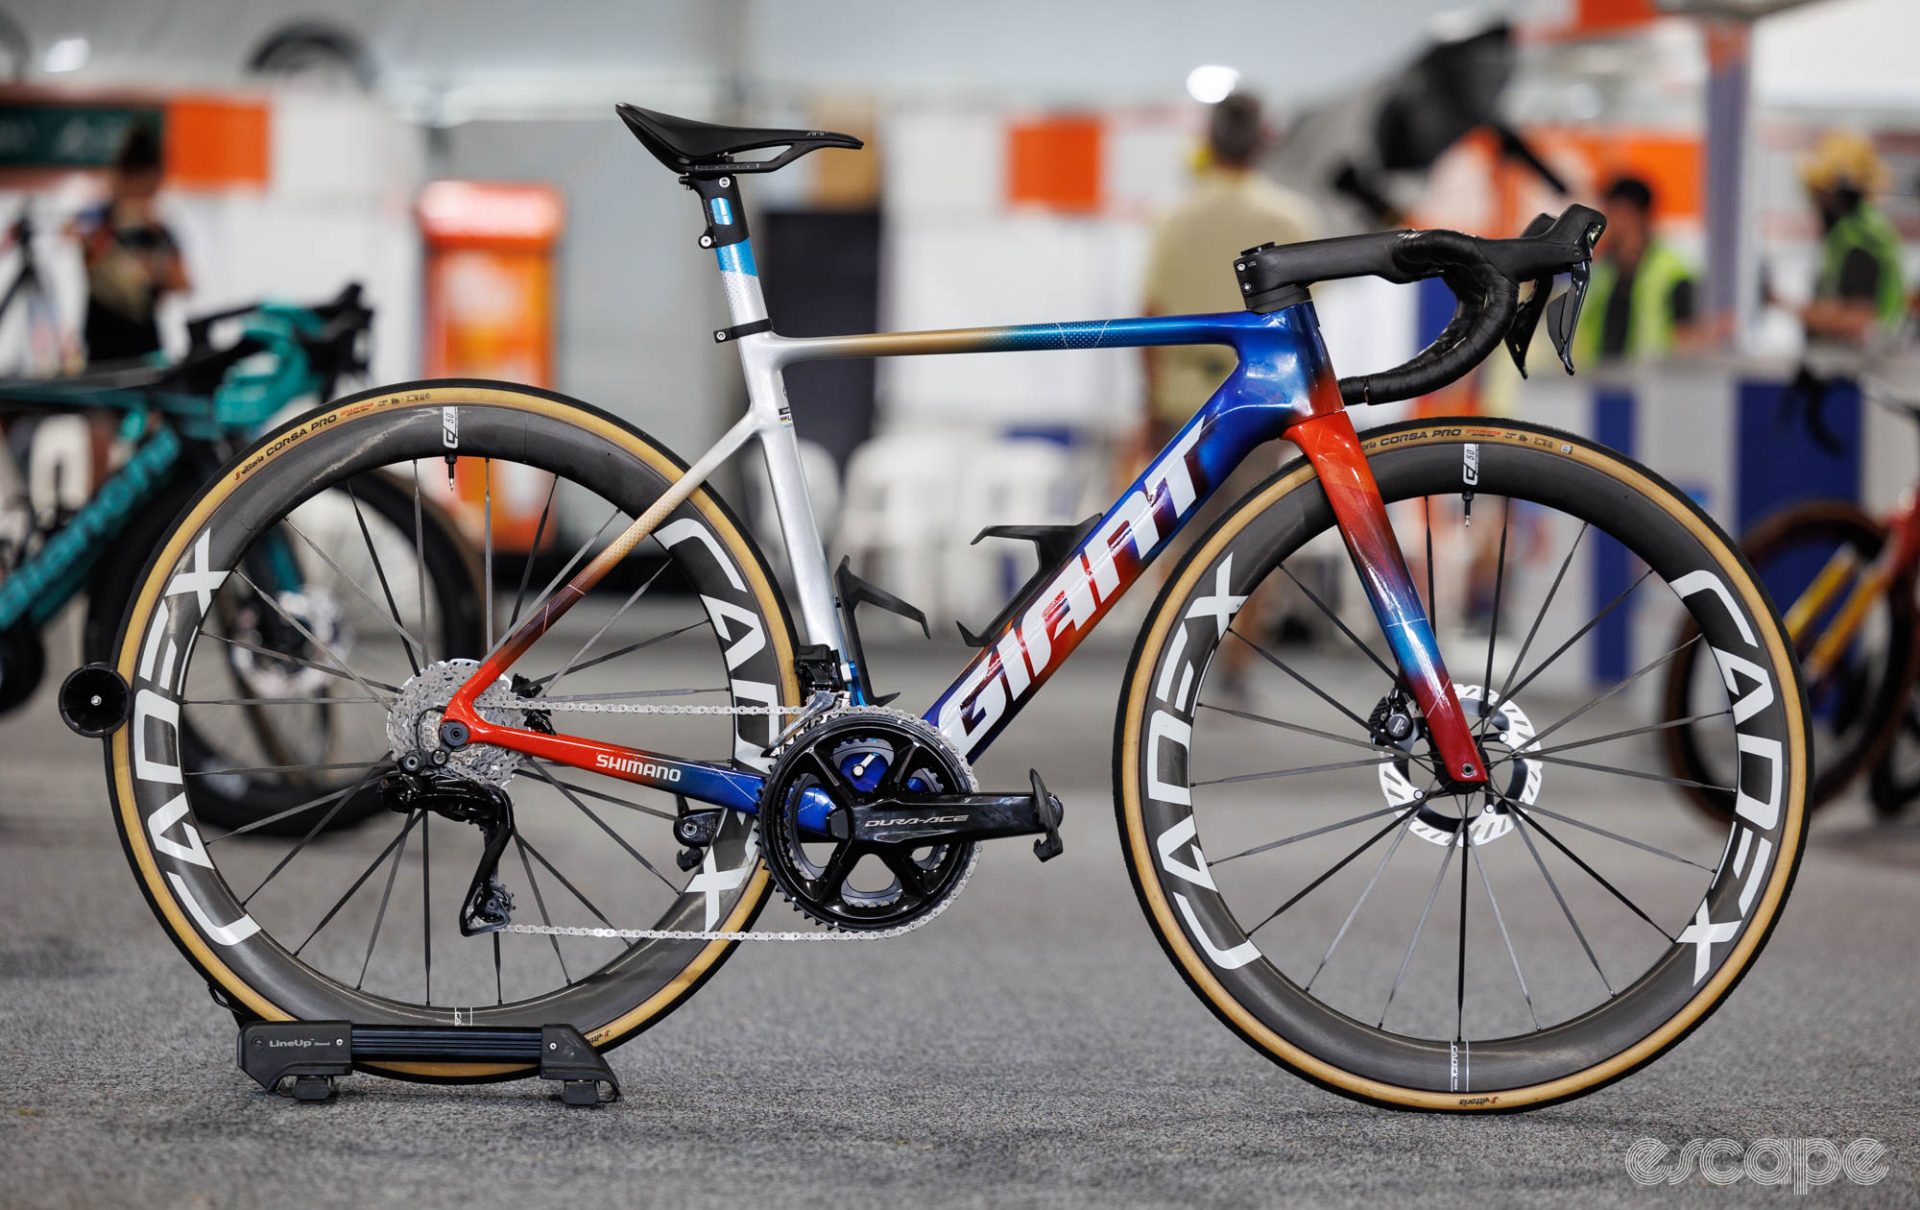 Jayco-AlUla's Giant Propel Advanced SL, with an 80s-style multicolor fade paint job in red, blue, white and even hints of gold.